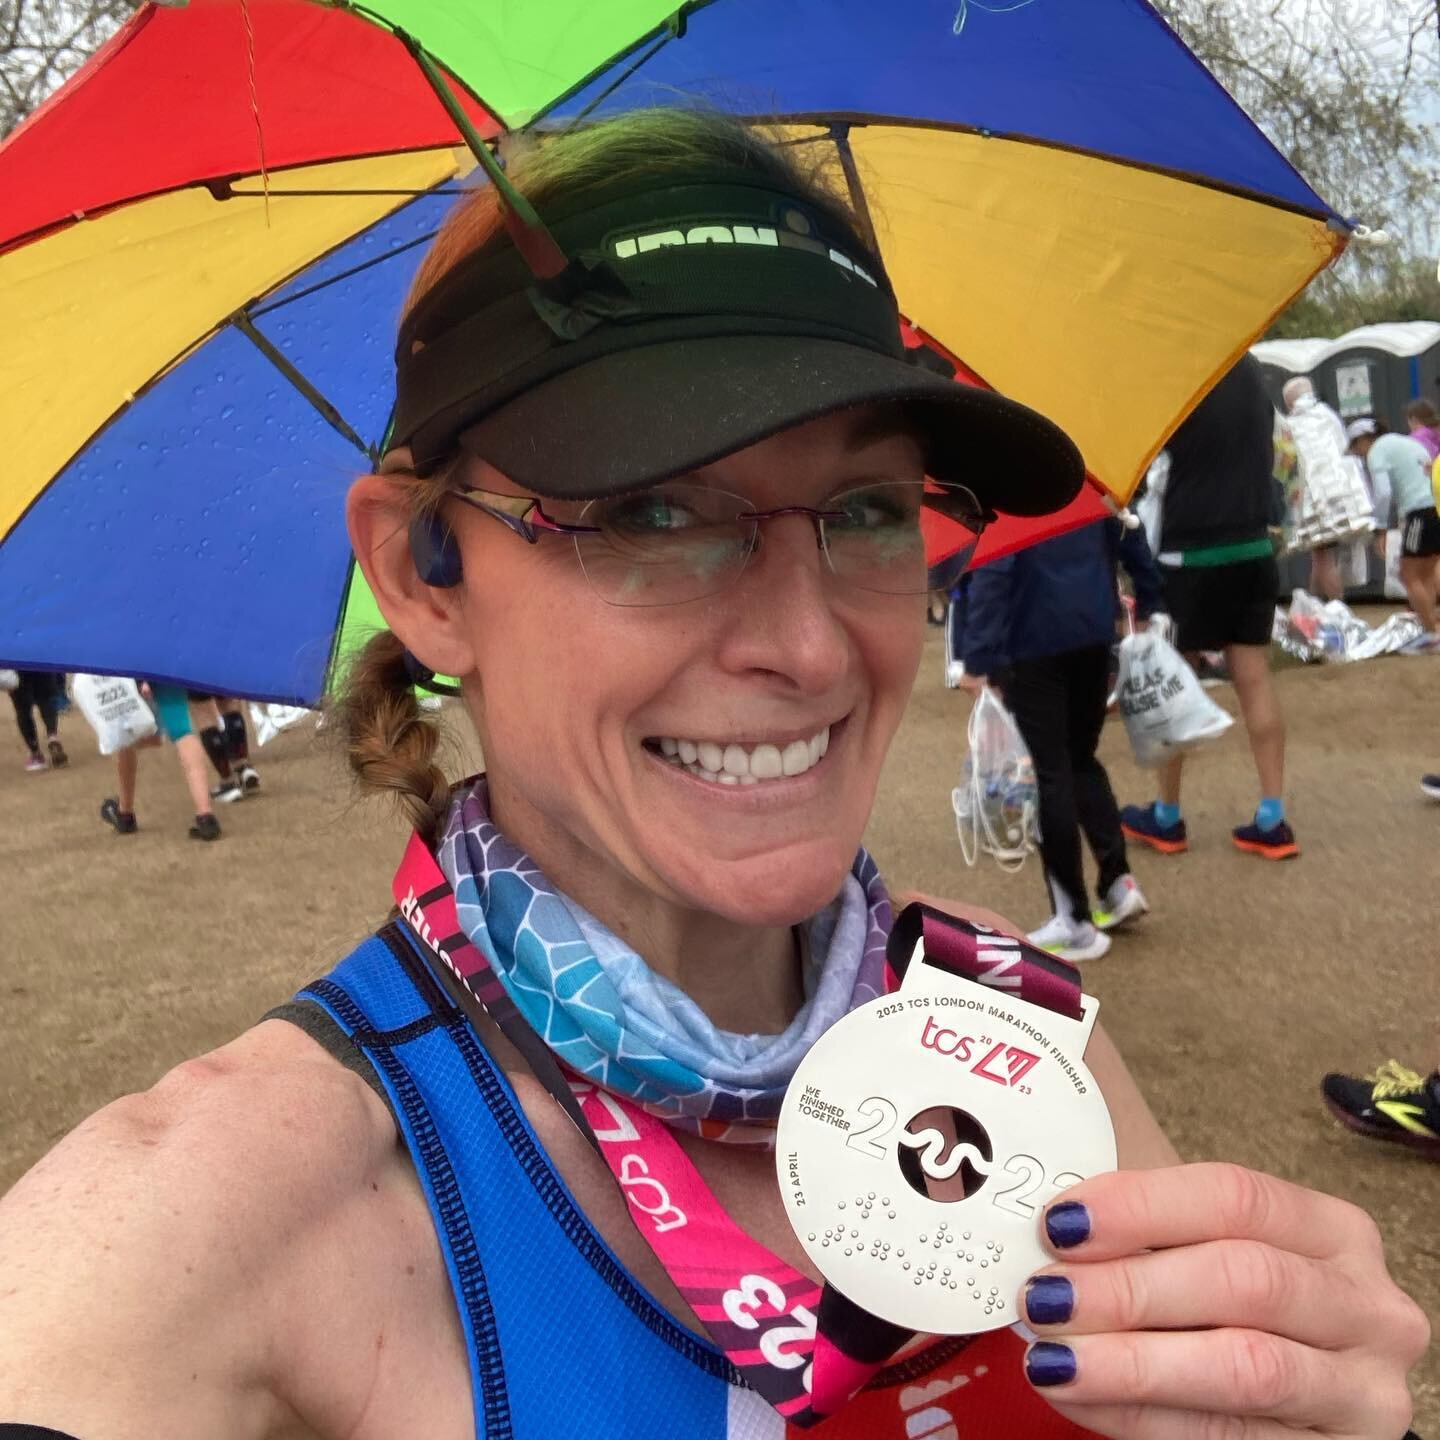 Belated congratulations to our girl Connie Geoghan who completed her 4th World Major Marathon in London last weekend! Not only did she manage a solid time as she&rsquo;s mending another injury 🤦&zwj;♀️ but she also made it a fashion statement! She r